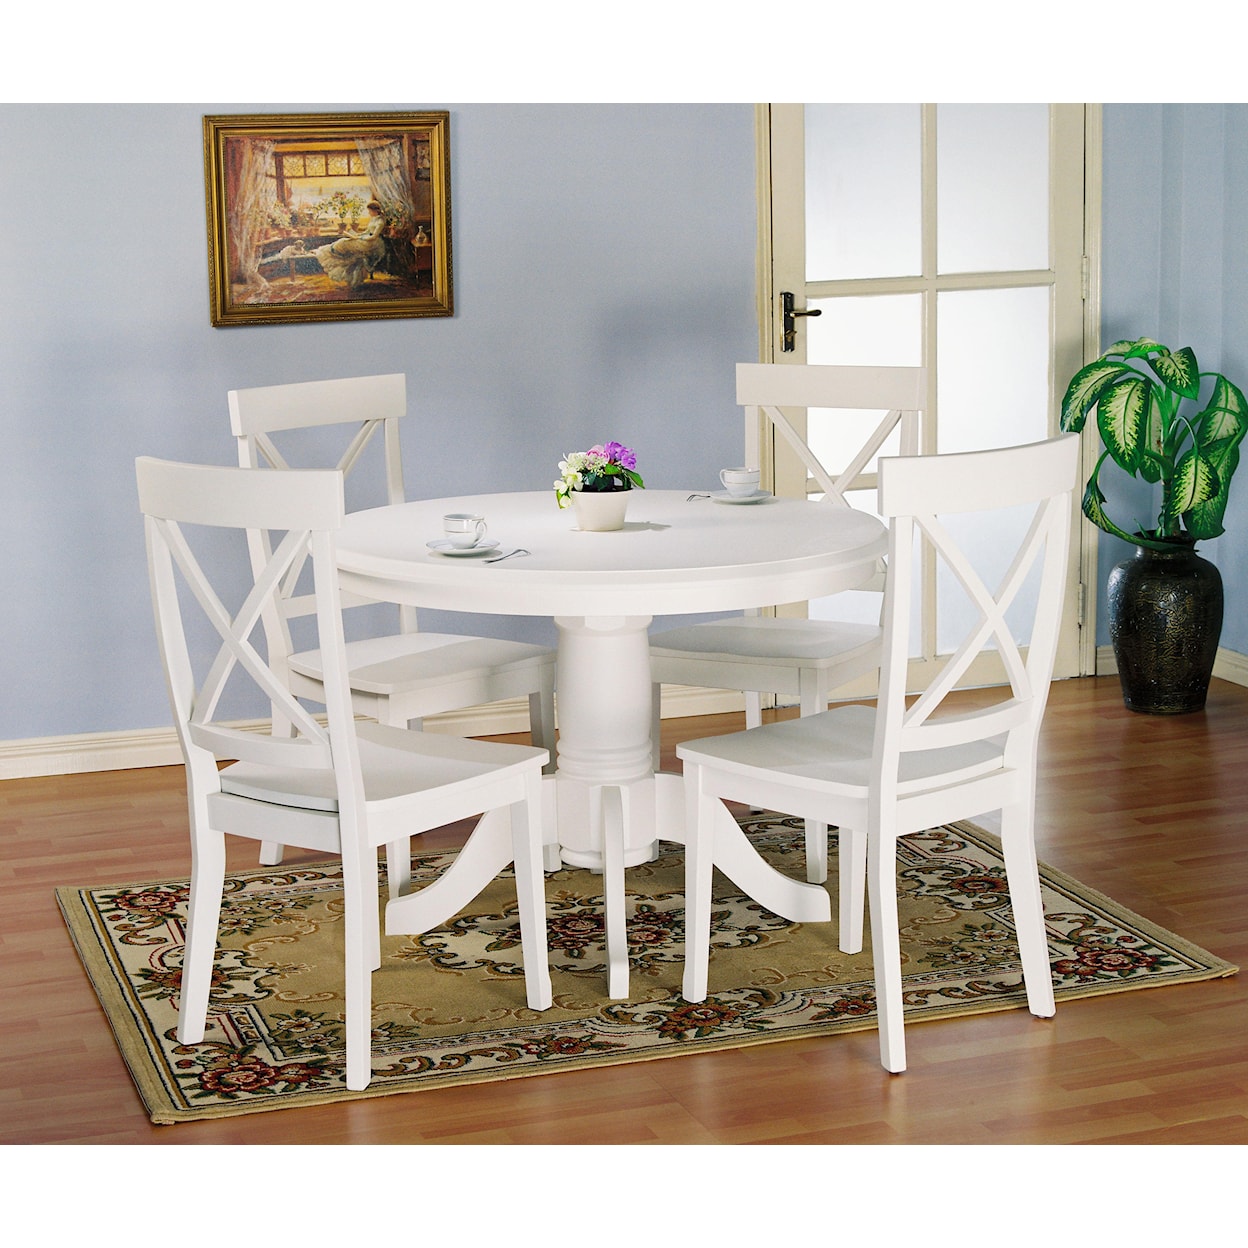 Holland House 1280 5 pc. Table and Chairs Set